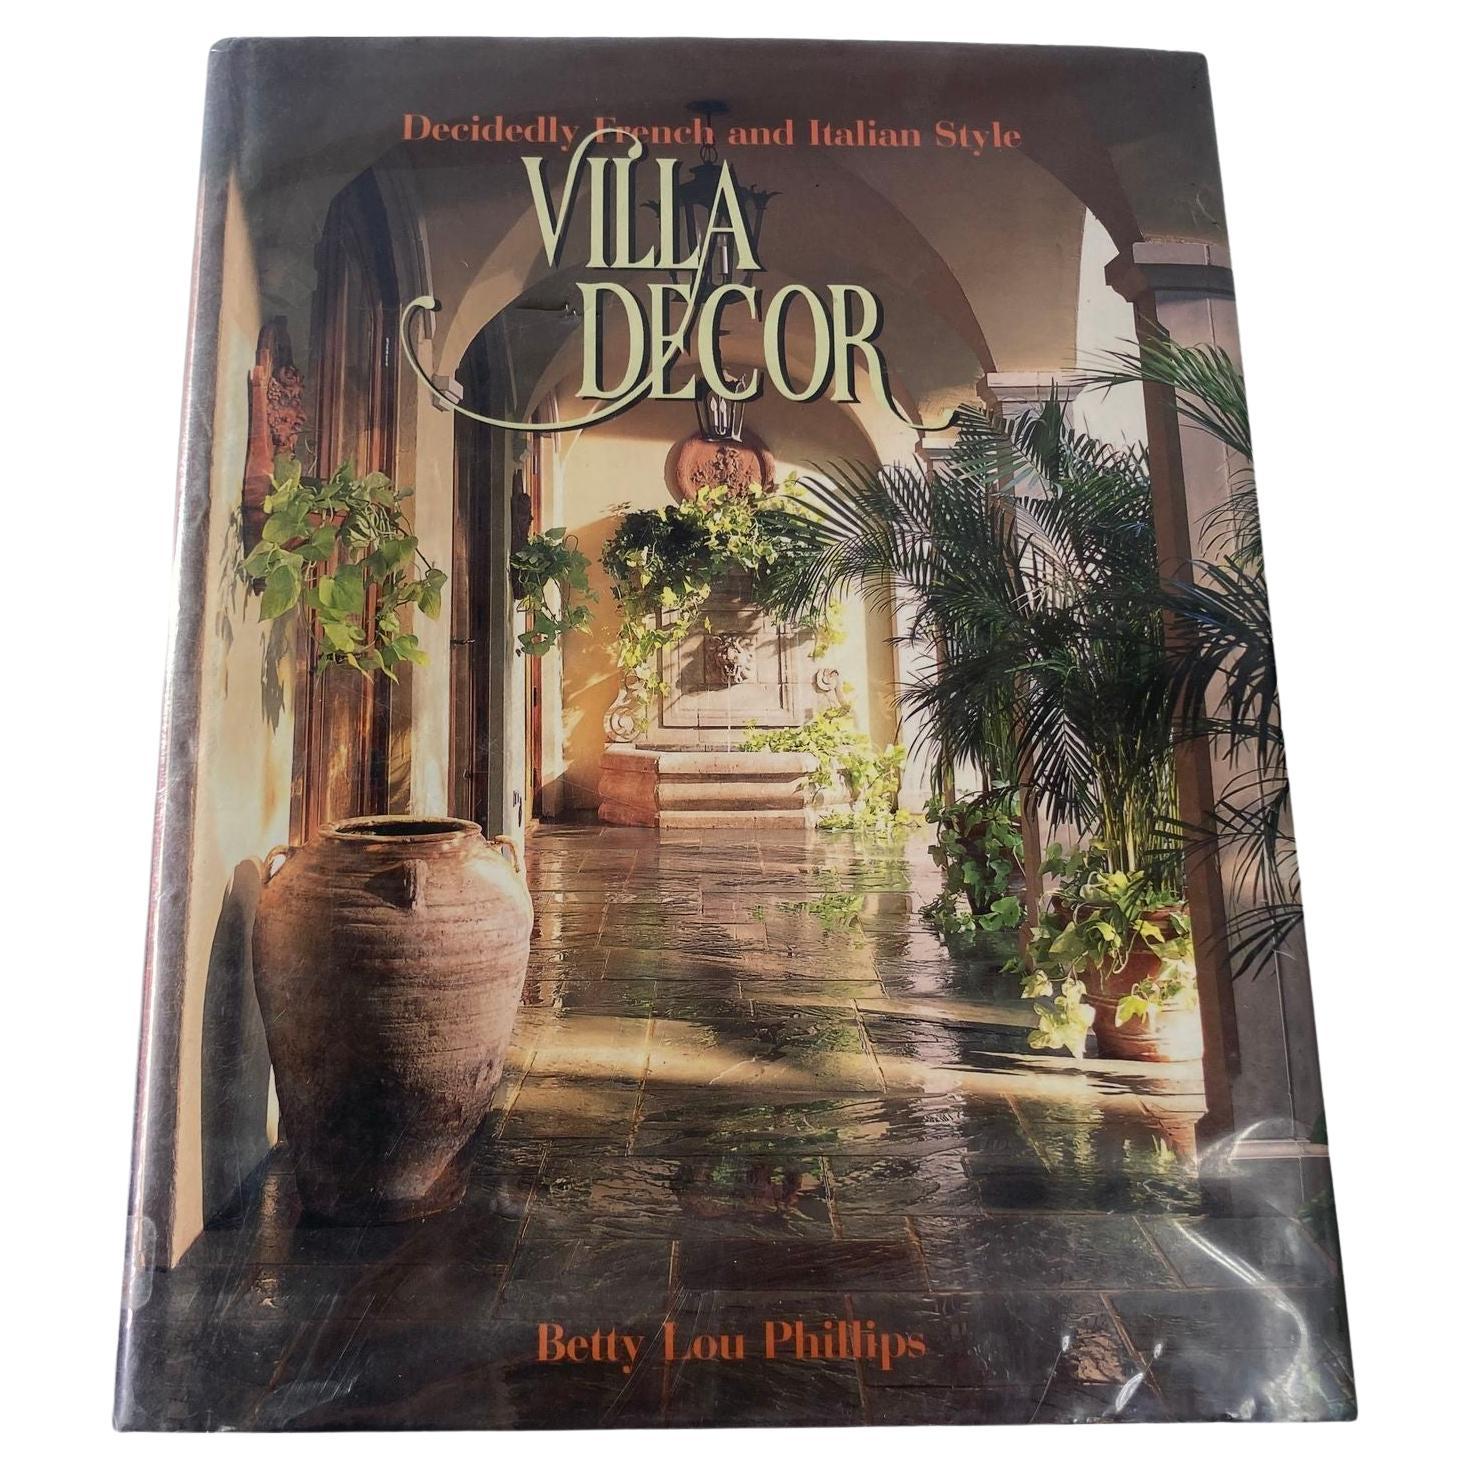 Villa Decor: Decidedly French and Italian Style Hardcover by Betty Lou Phillips For Sale